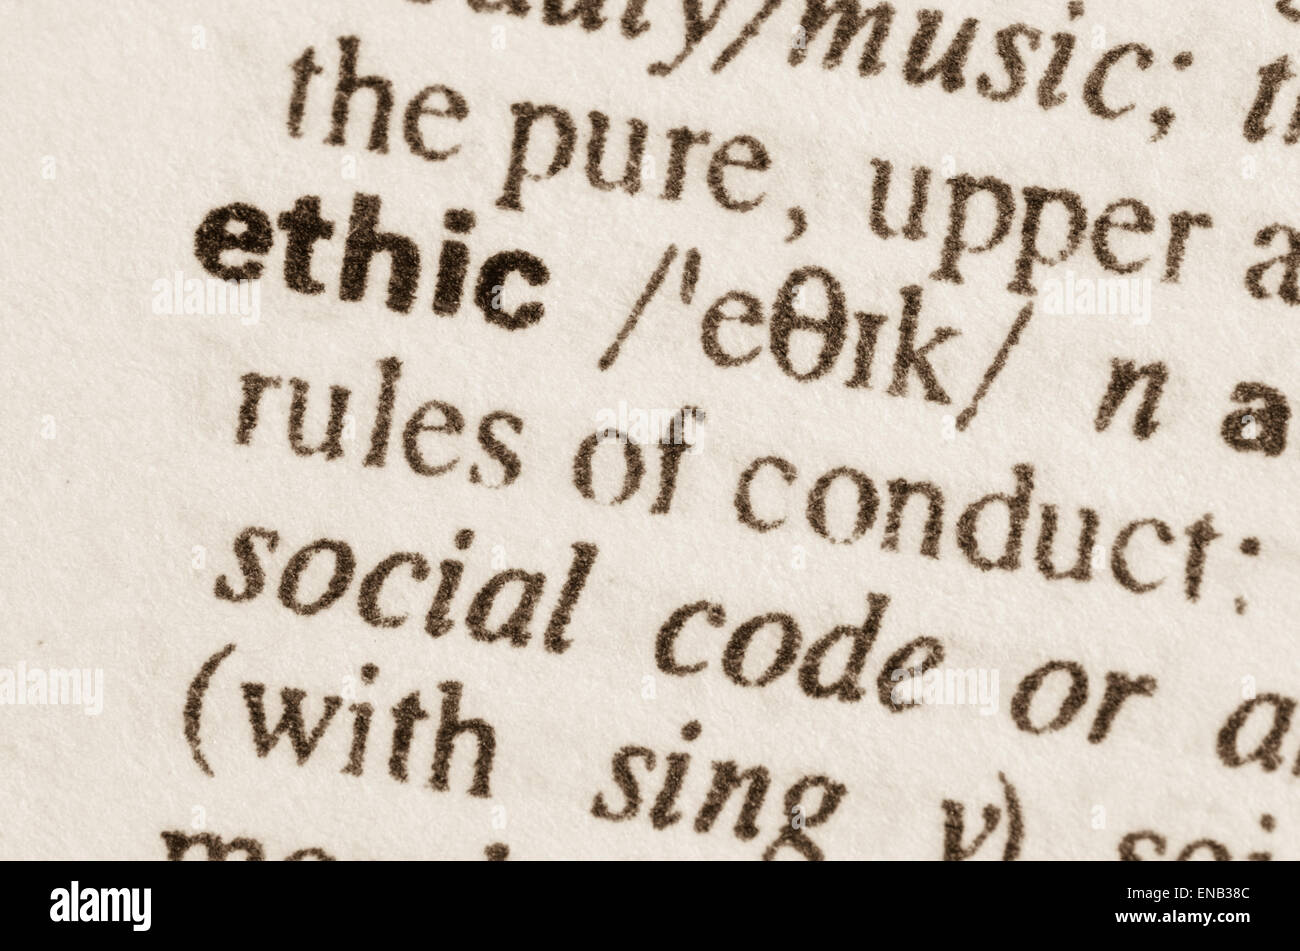 Definition of word ethic in dictionary Stock Photo